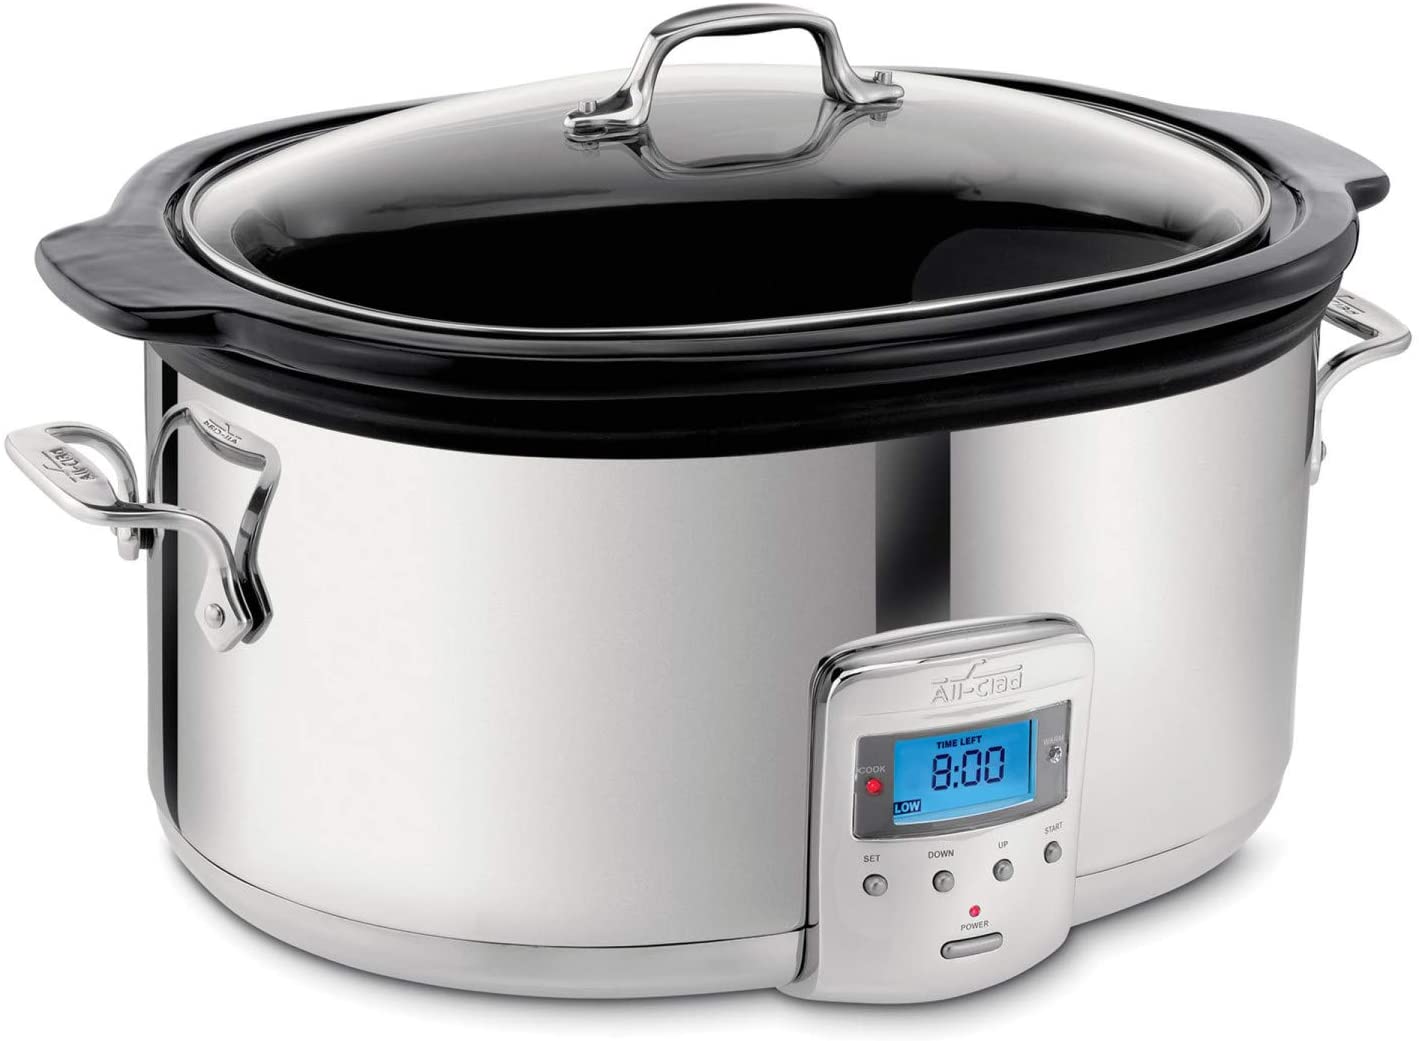 All-Clad Gourmet Plus Slow Cooker, 7-Qt. with All-In One Browning